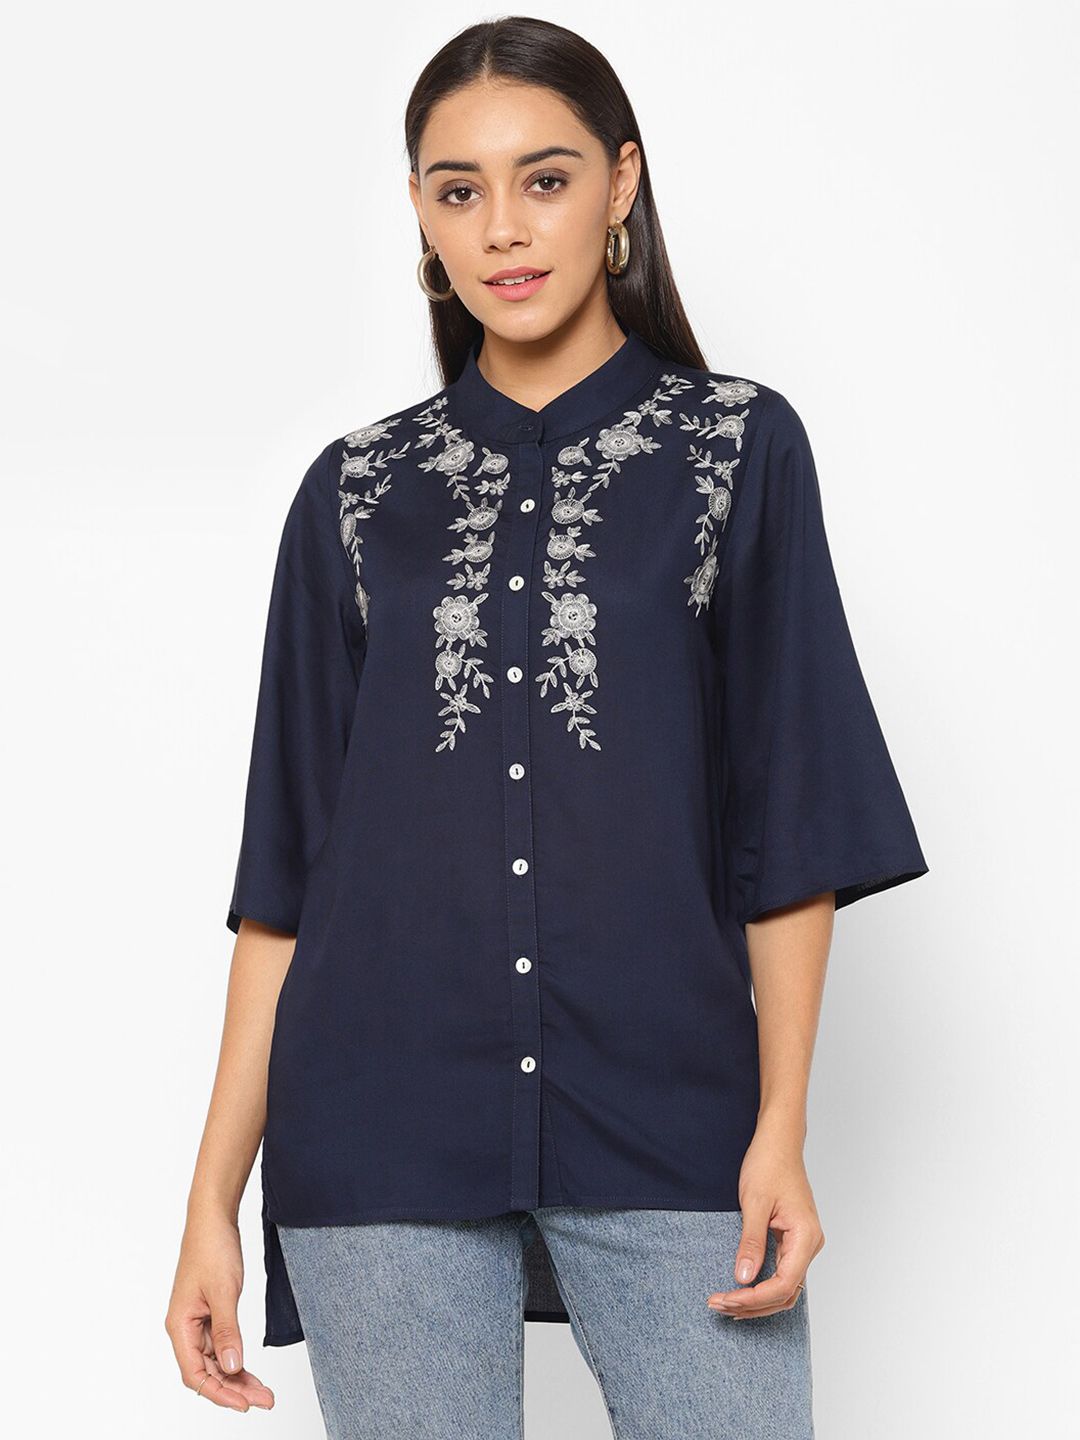 HOUSE OF KKARMA Navy Blue Floral Embroidered Mandarin Collar Shirt Style Top Price in India